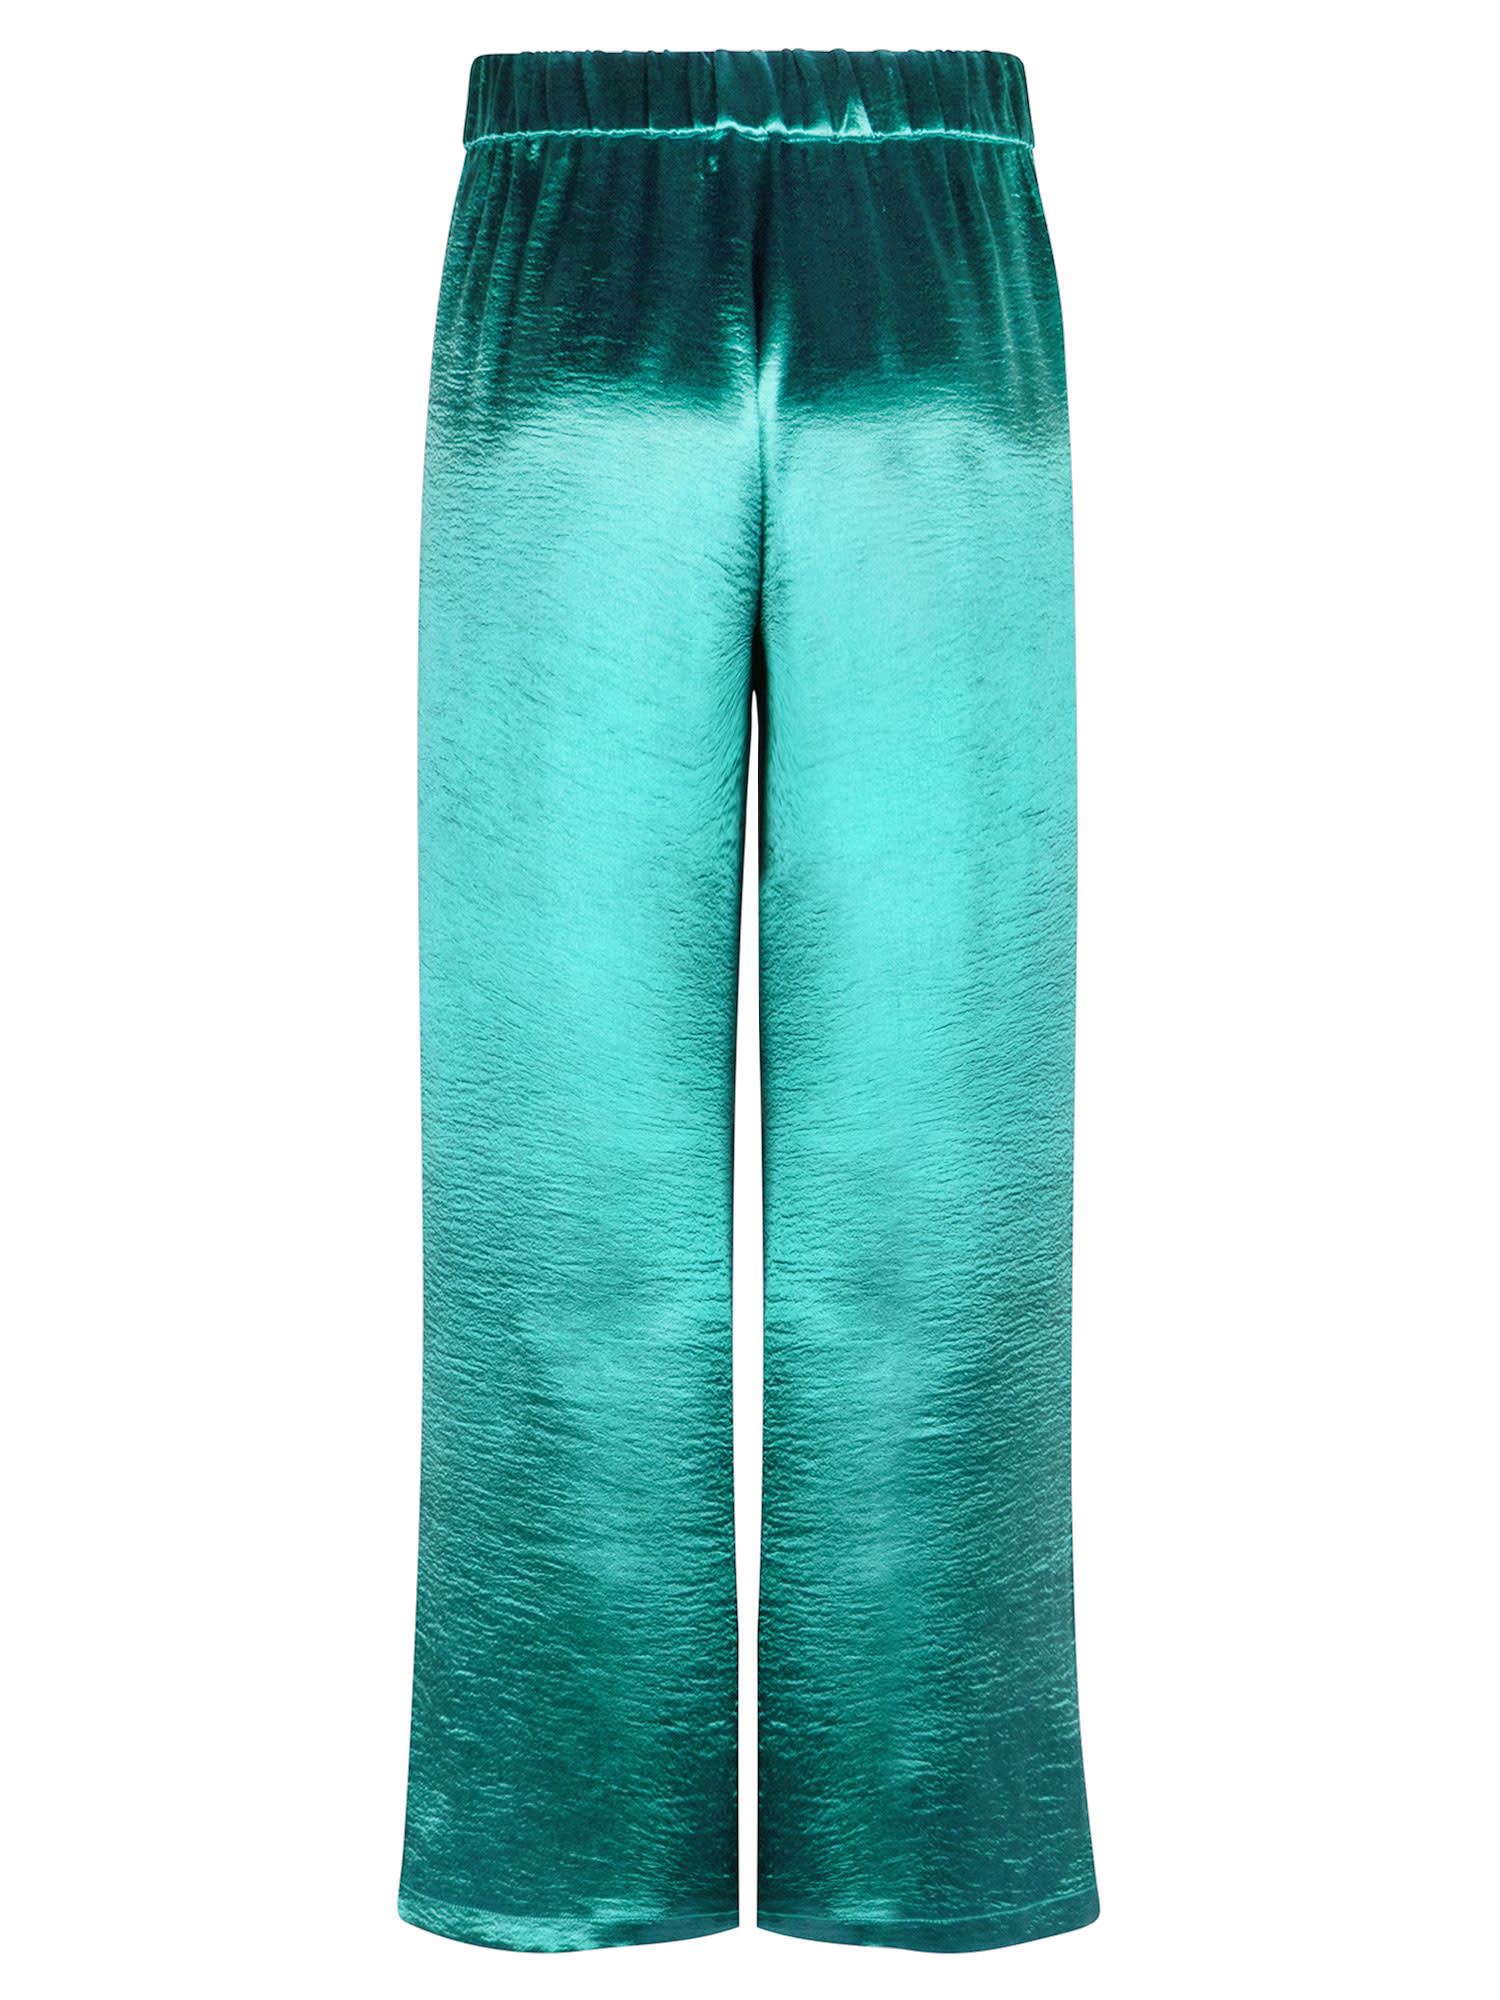 Alicia satin wide pant Turquoise-2